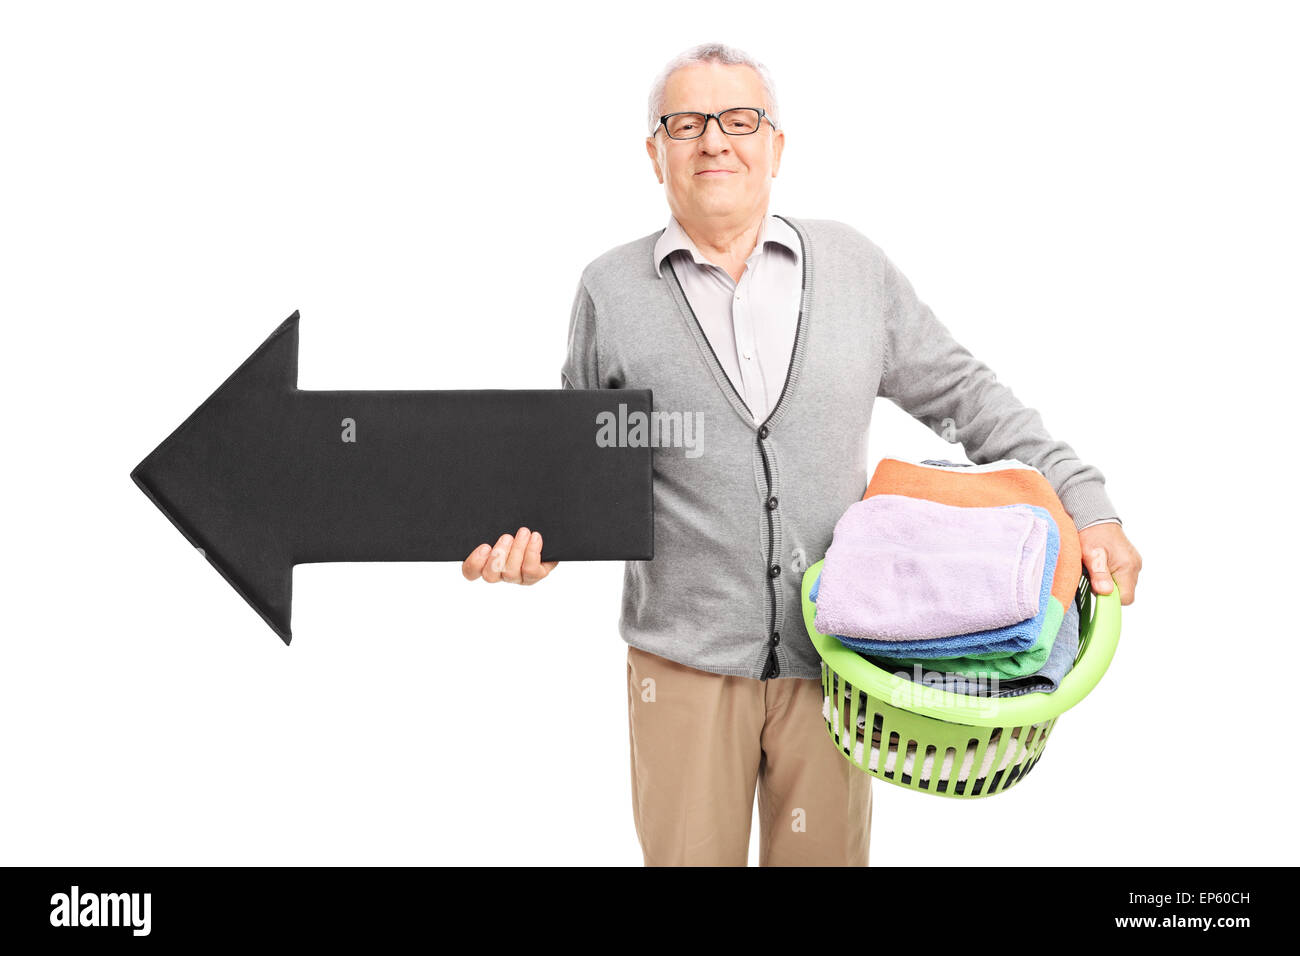 Senor gentleman holding a laundry basket full of clean clothes and a big black arrow pointing left isolated on white background Stock Photo